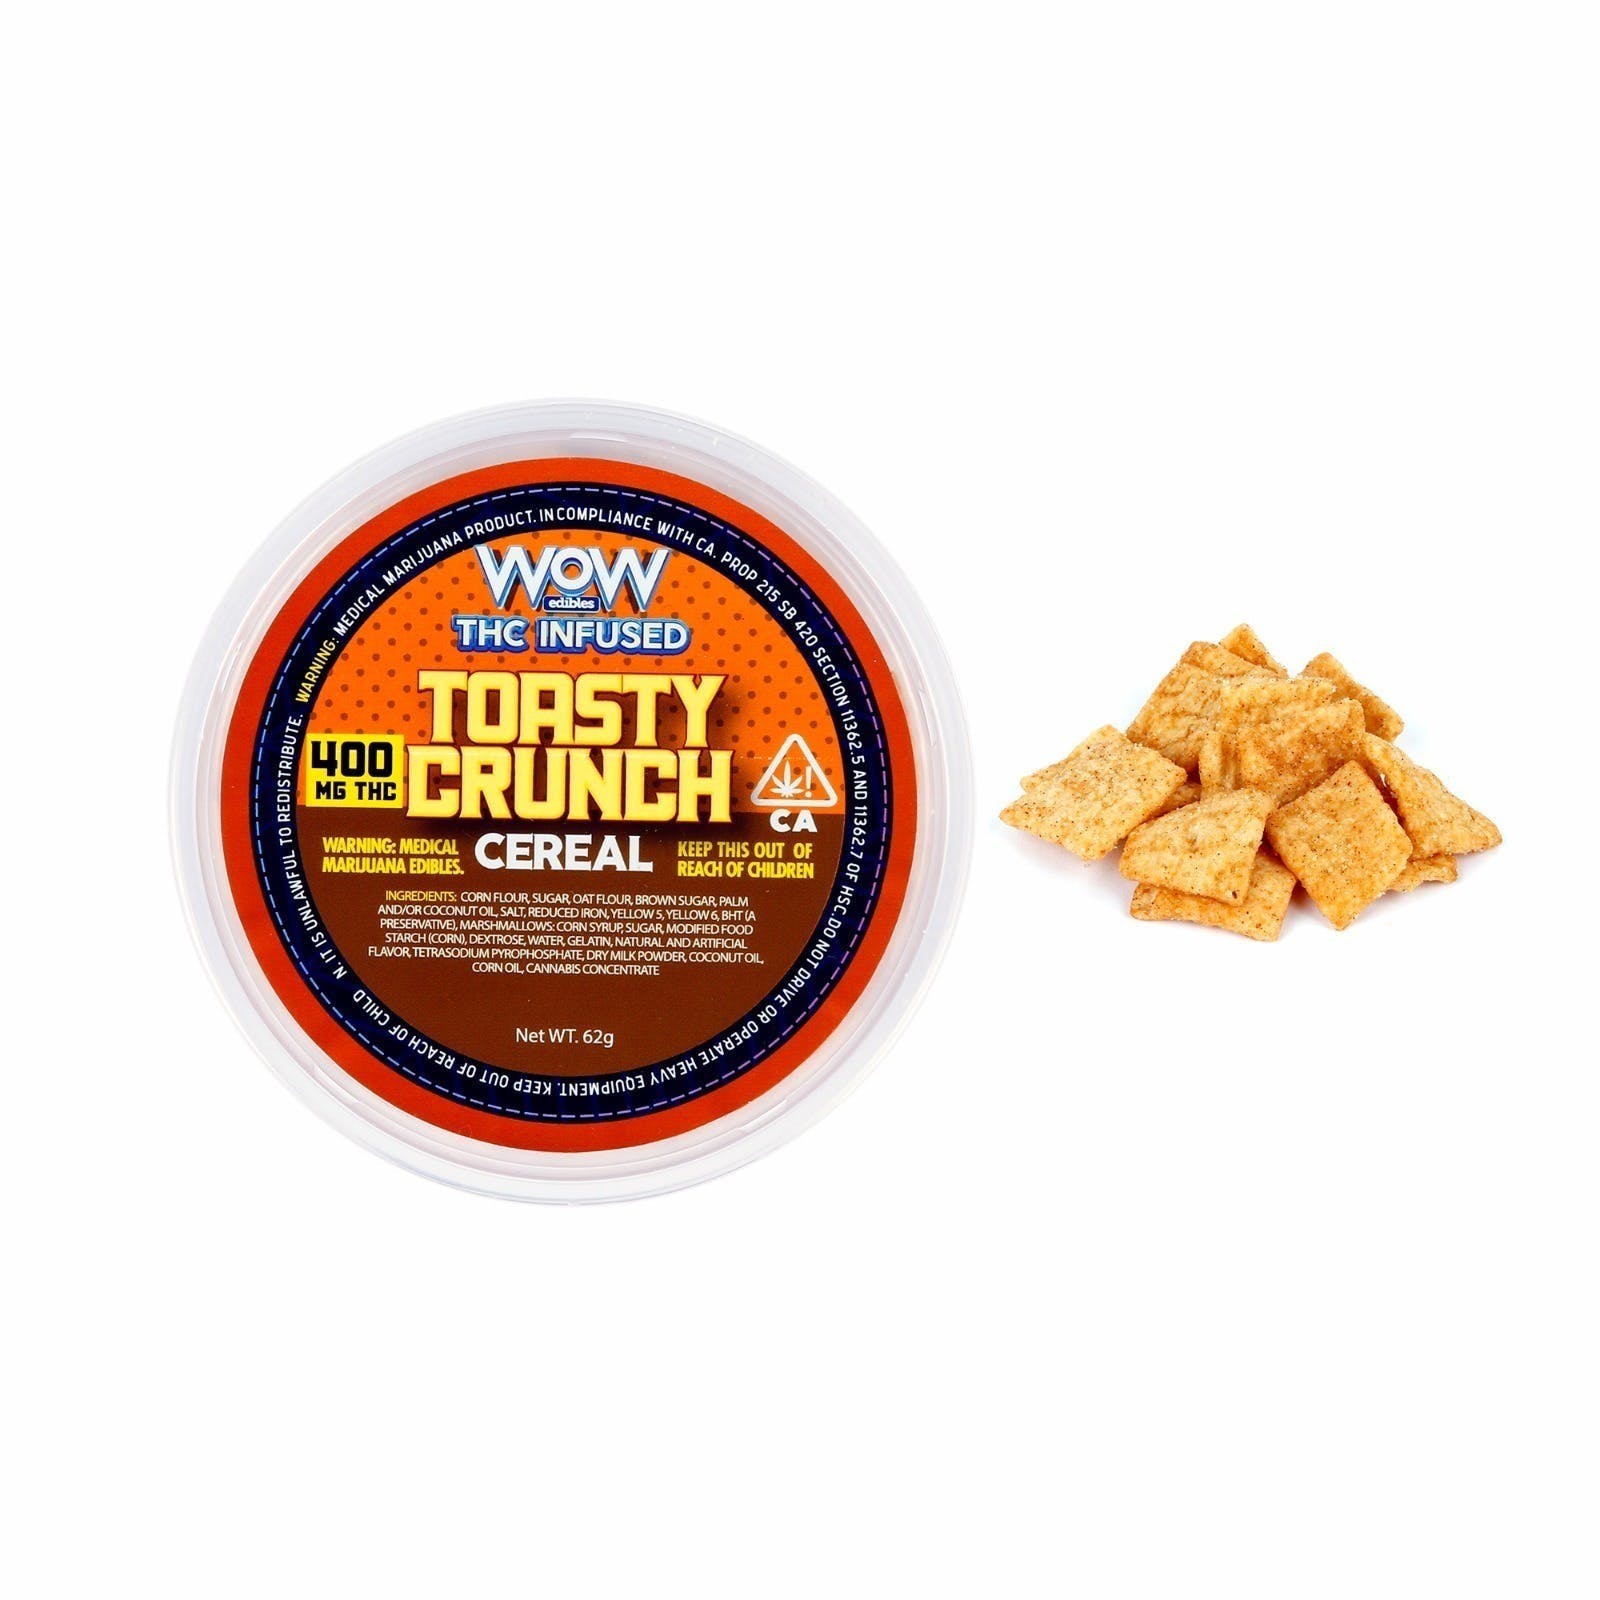 WOW CEREAL BOWL "TOASTY CRUNCHIES" 400 MG